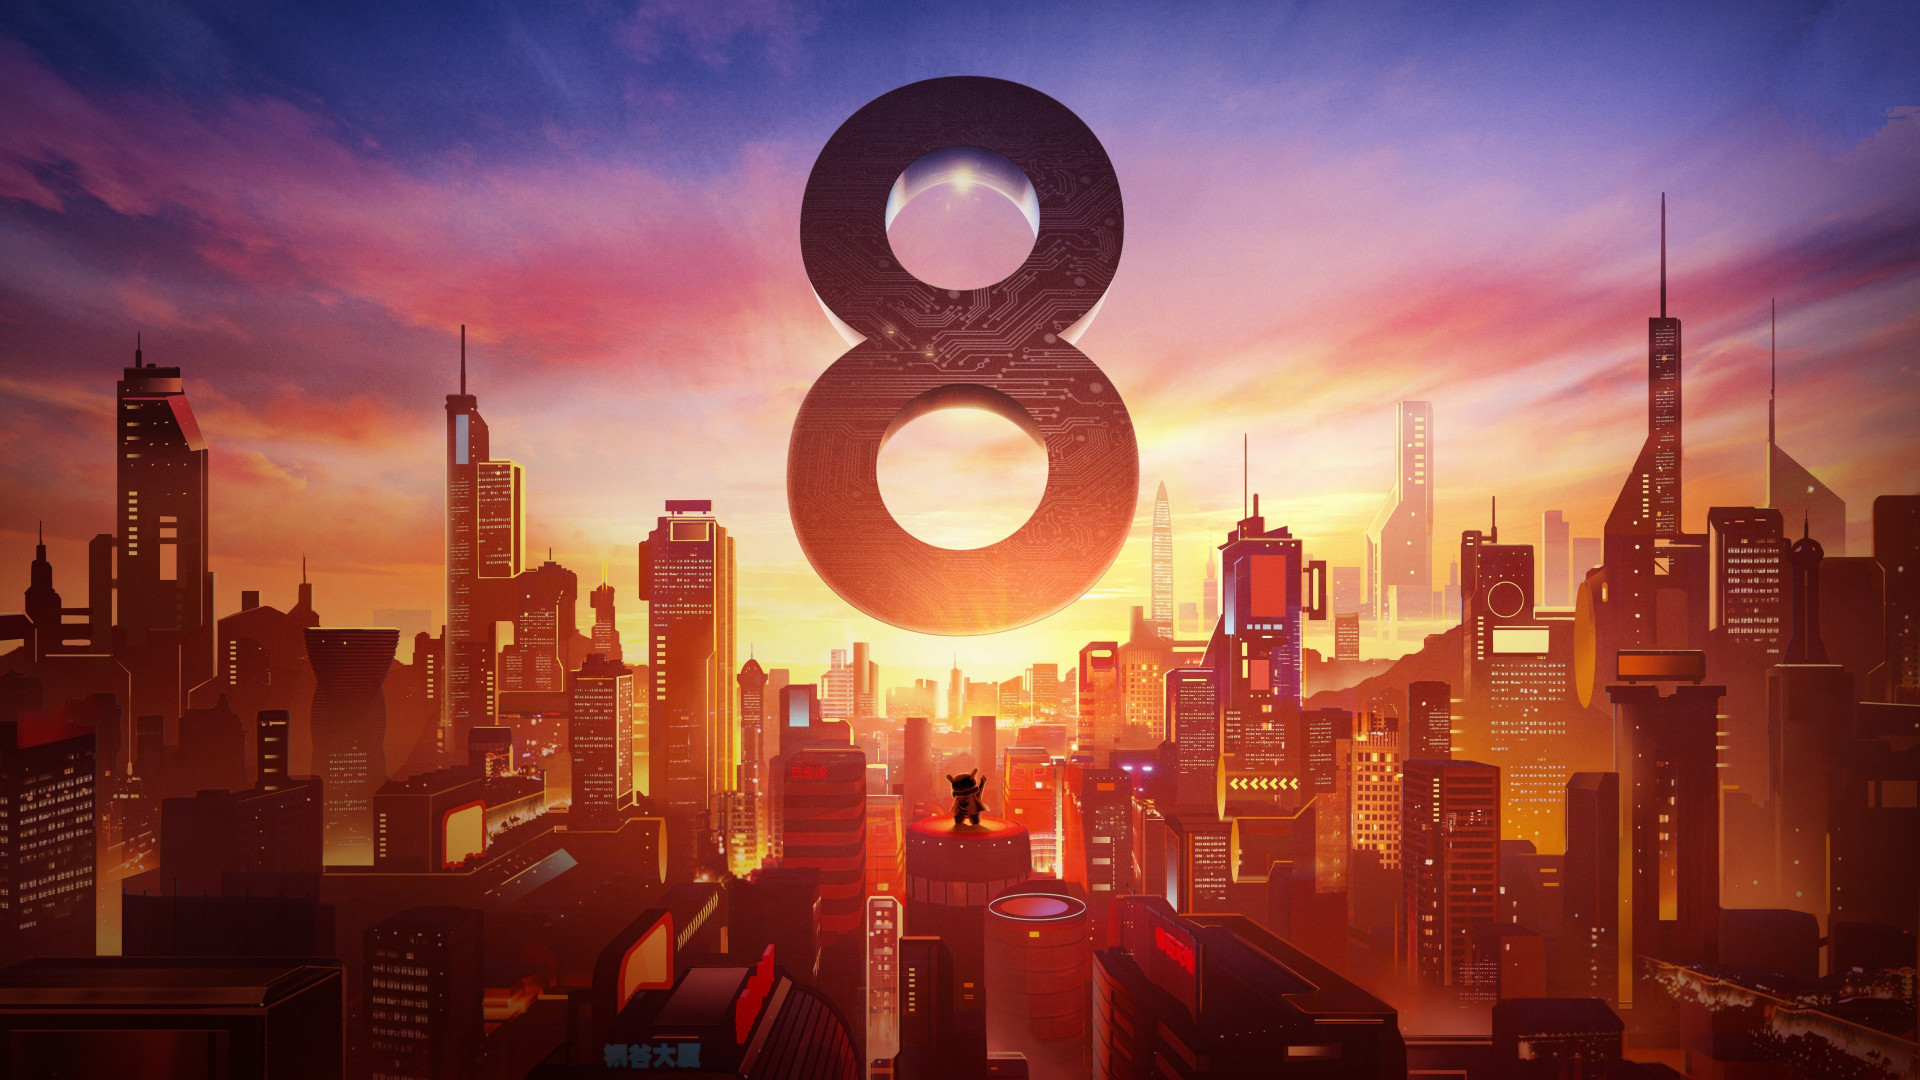 Xiaomi Mi 8. Poster from the launch event wallpaper 1920x1080